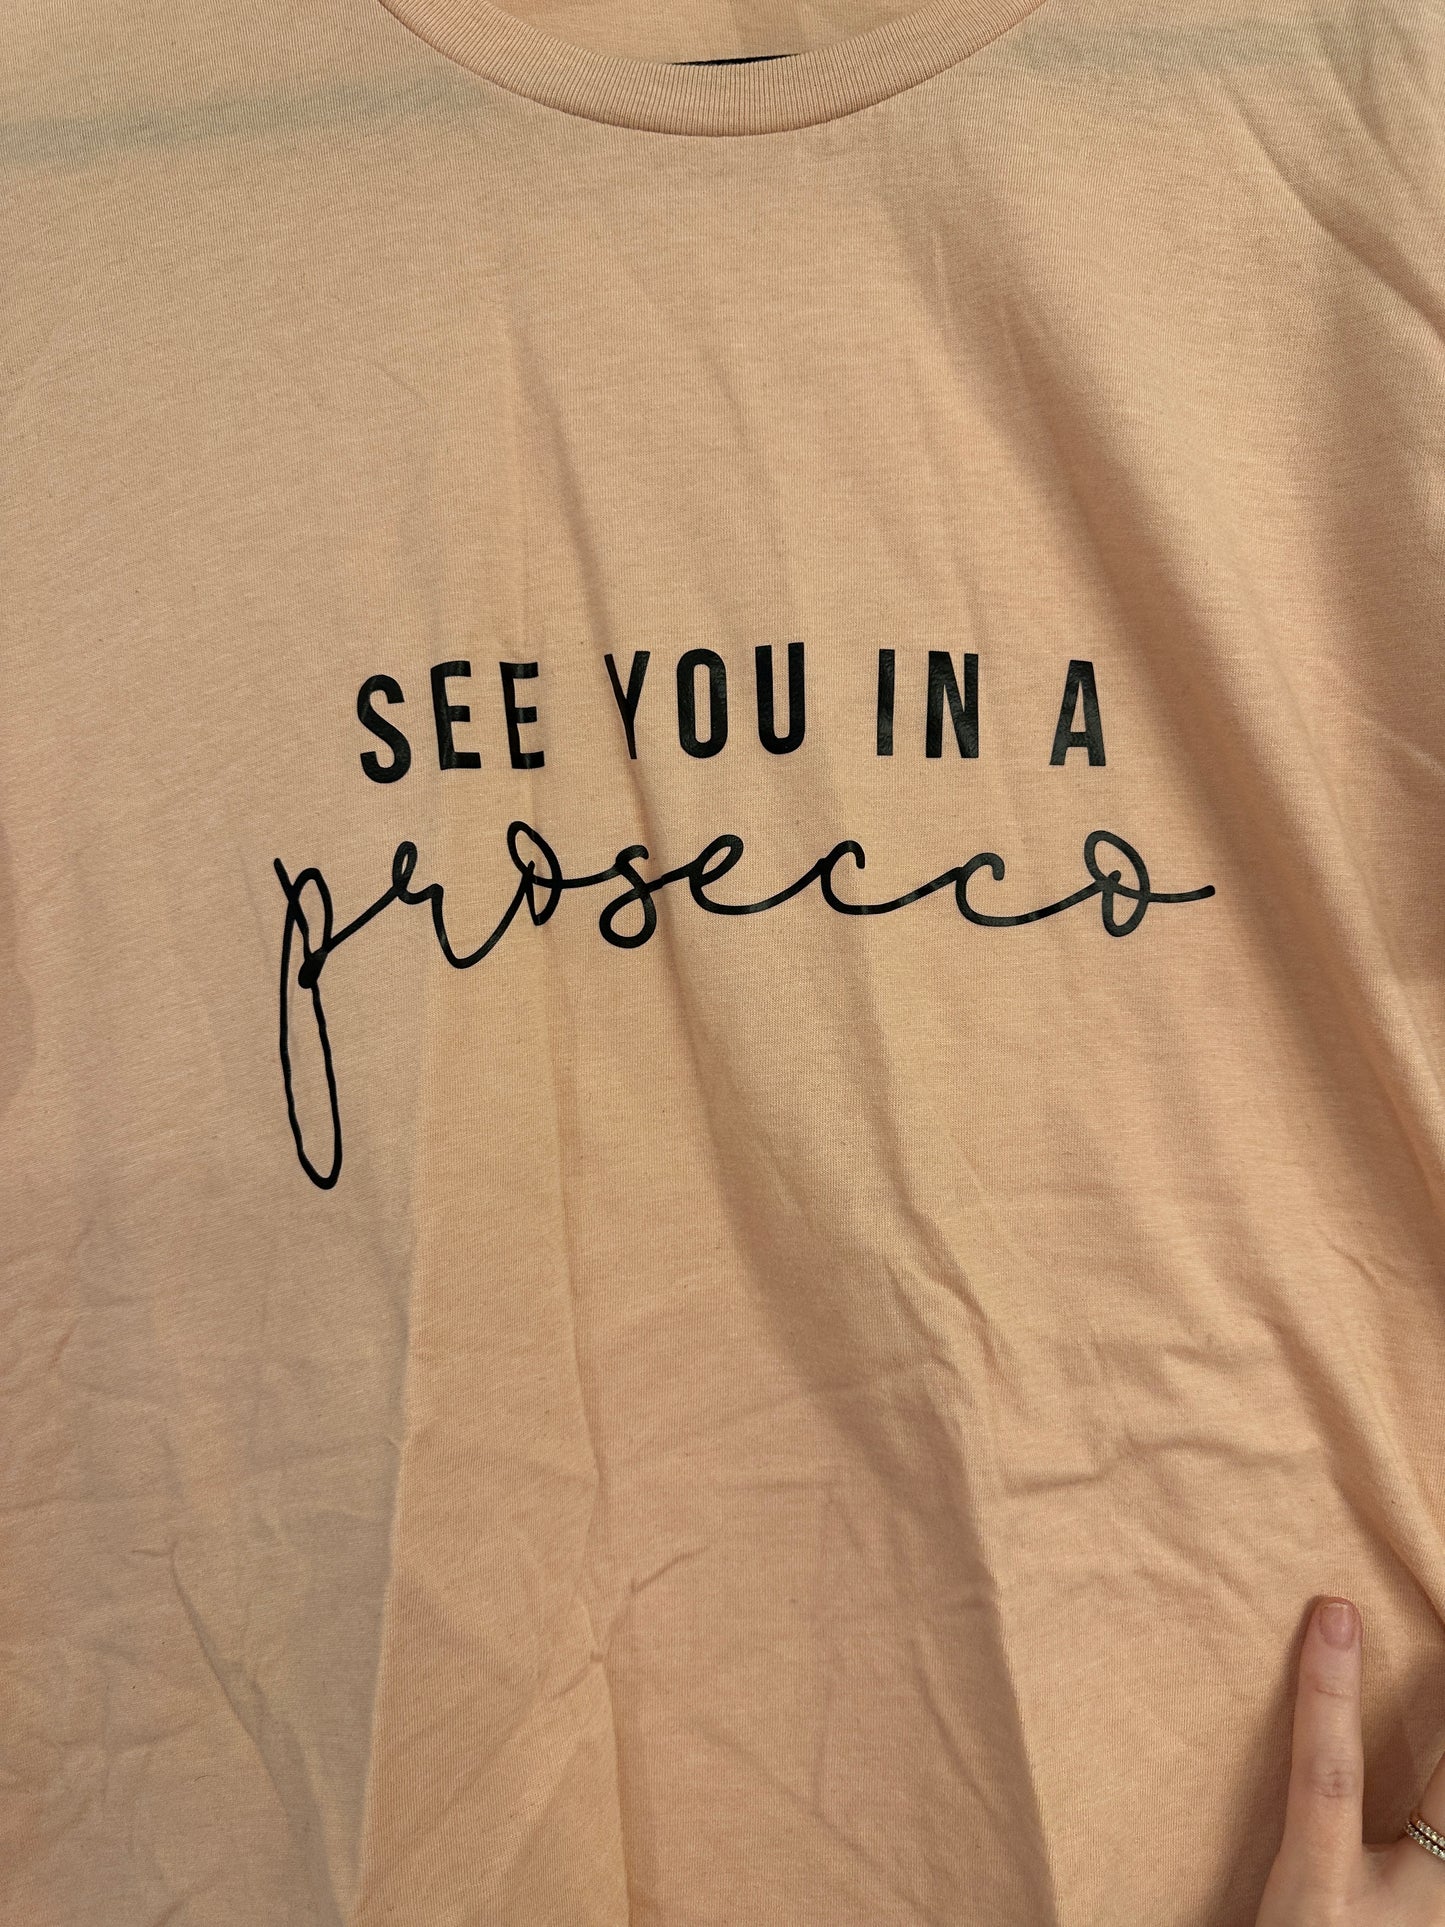 See You In A Prosecco Tshirt - Women's Size L